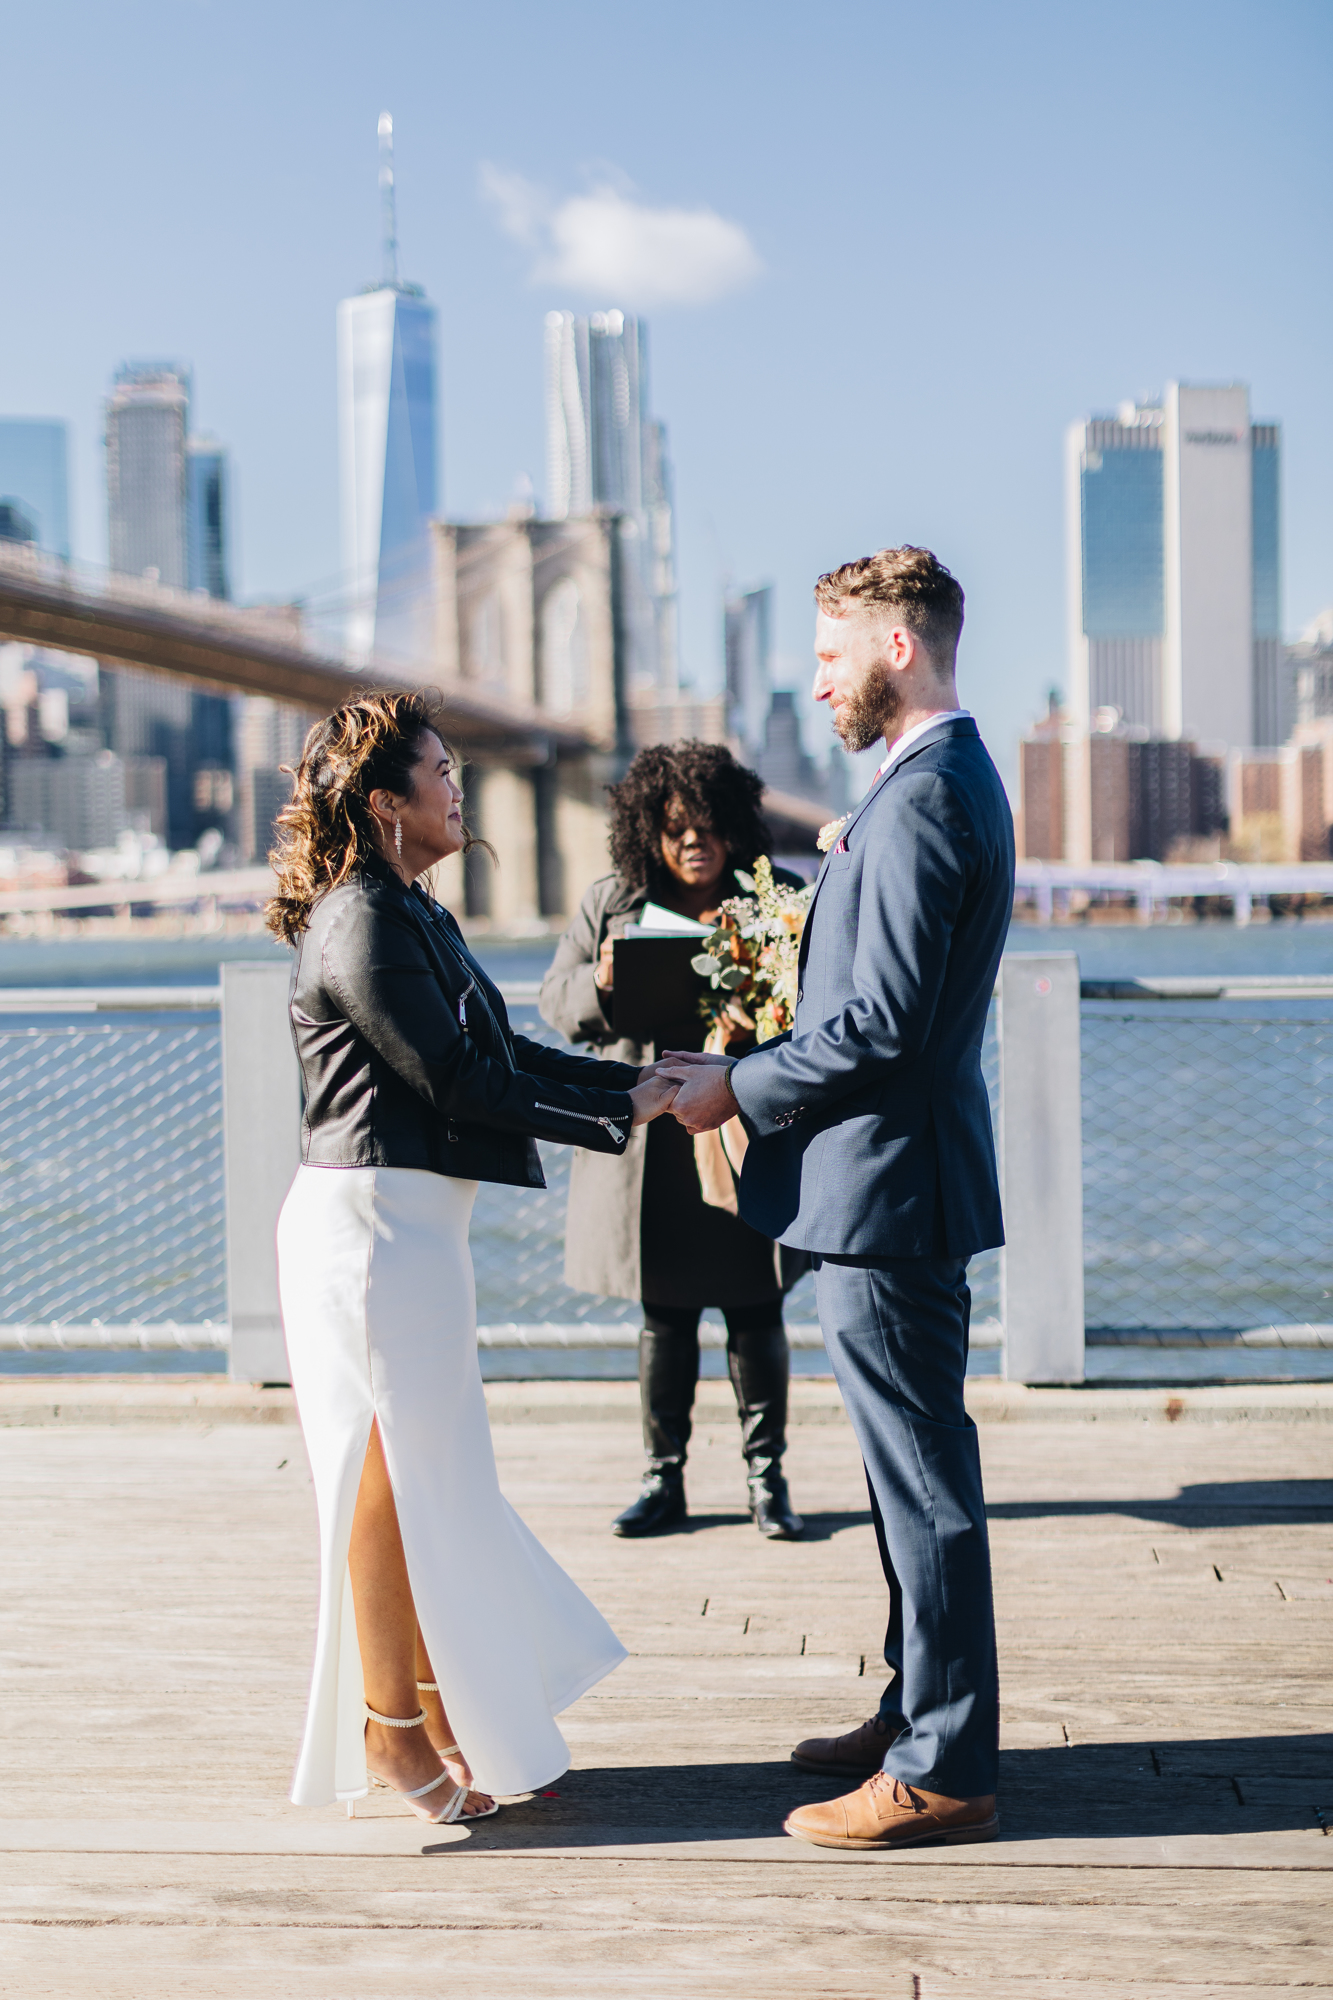 Gorgeous Fall DUMBO Elopement with NYC views and foliage